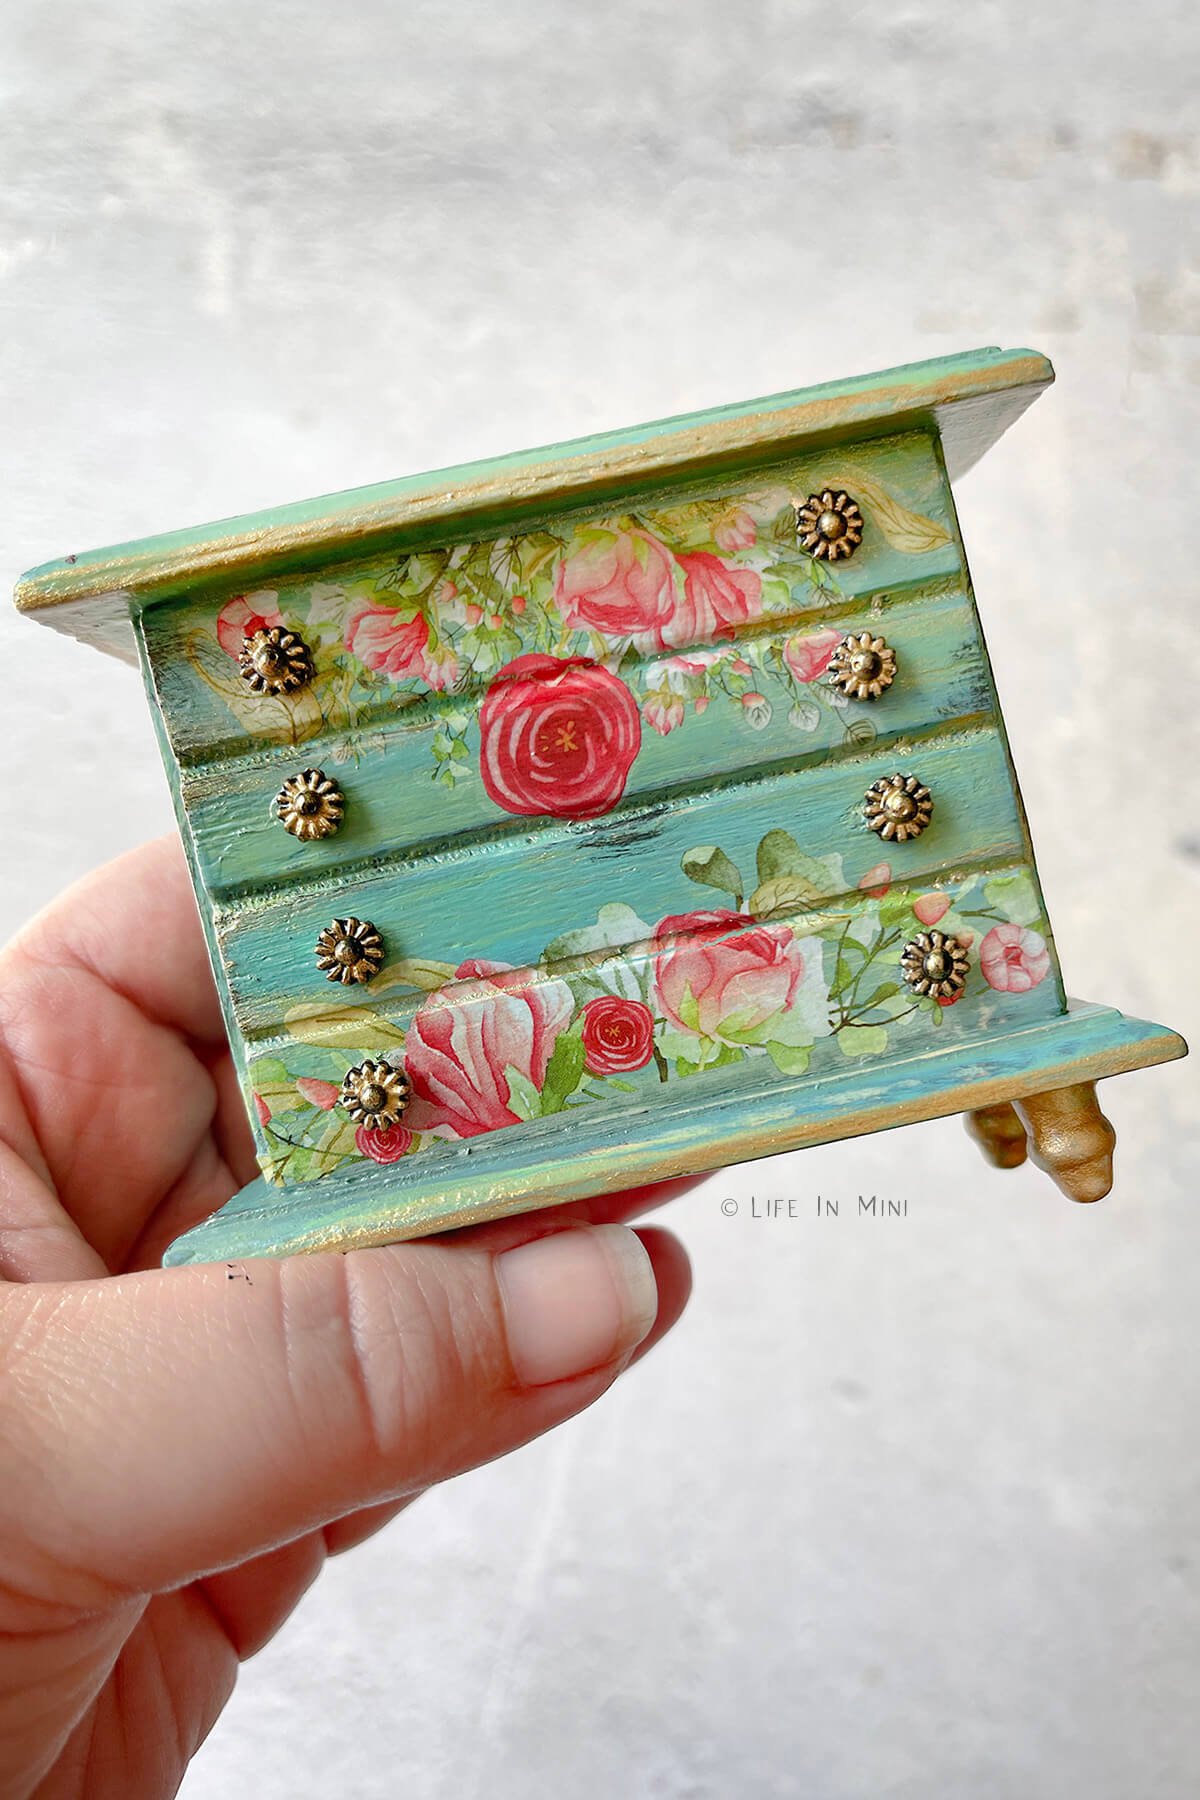 A hand holding a 1:12 teal dollhouse dresser with floral rub ons and gold touches